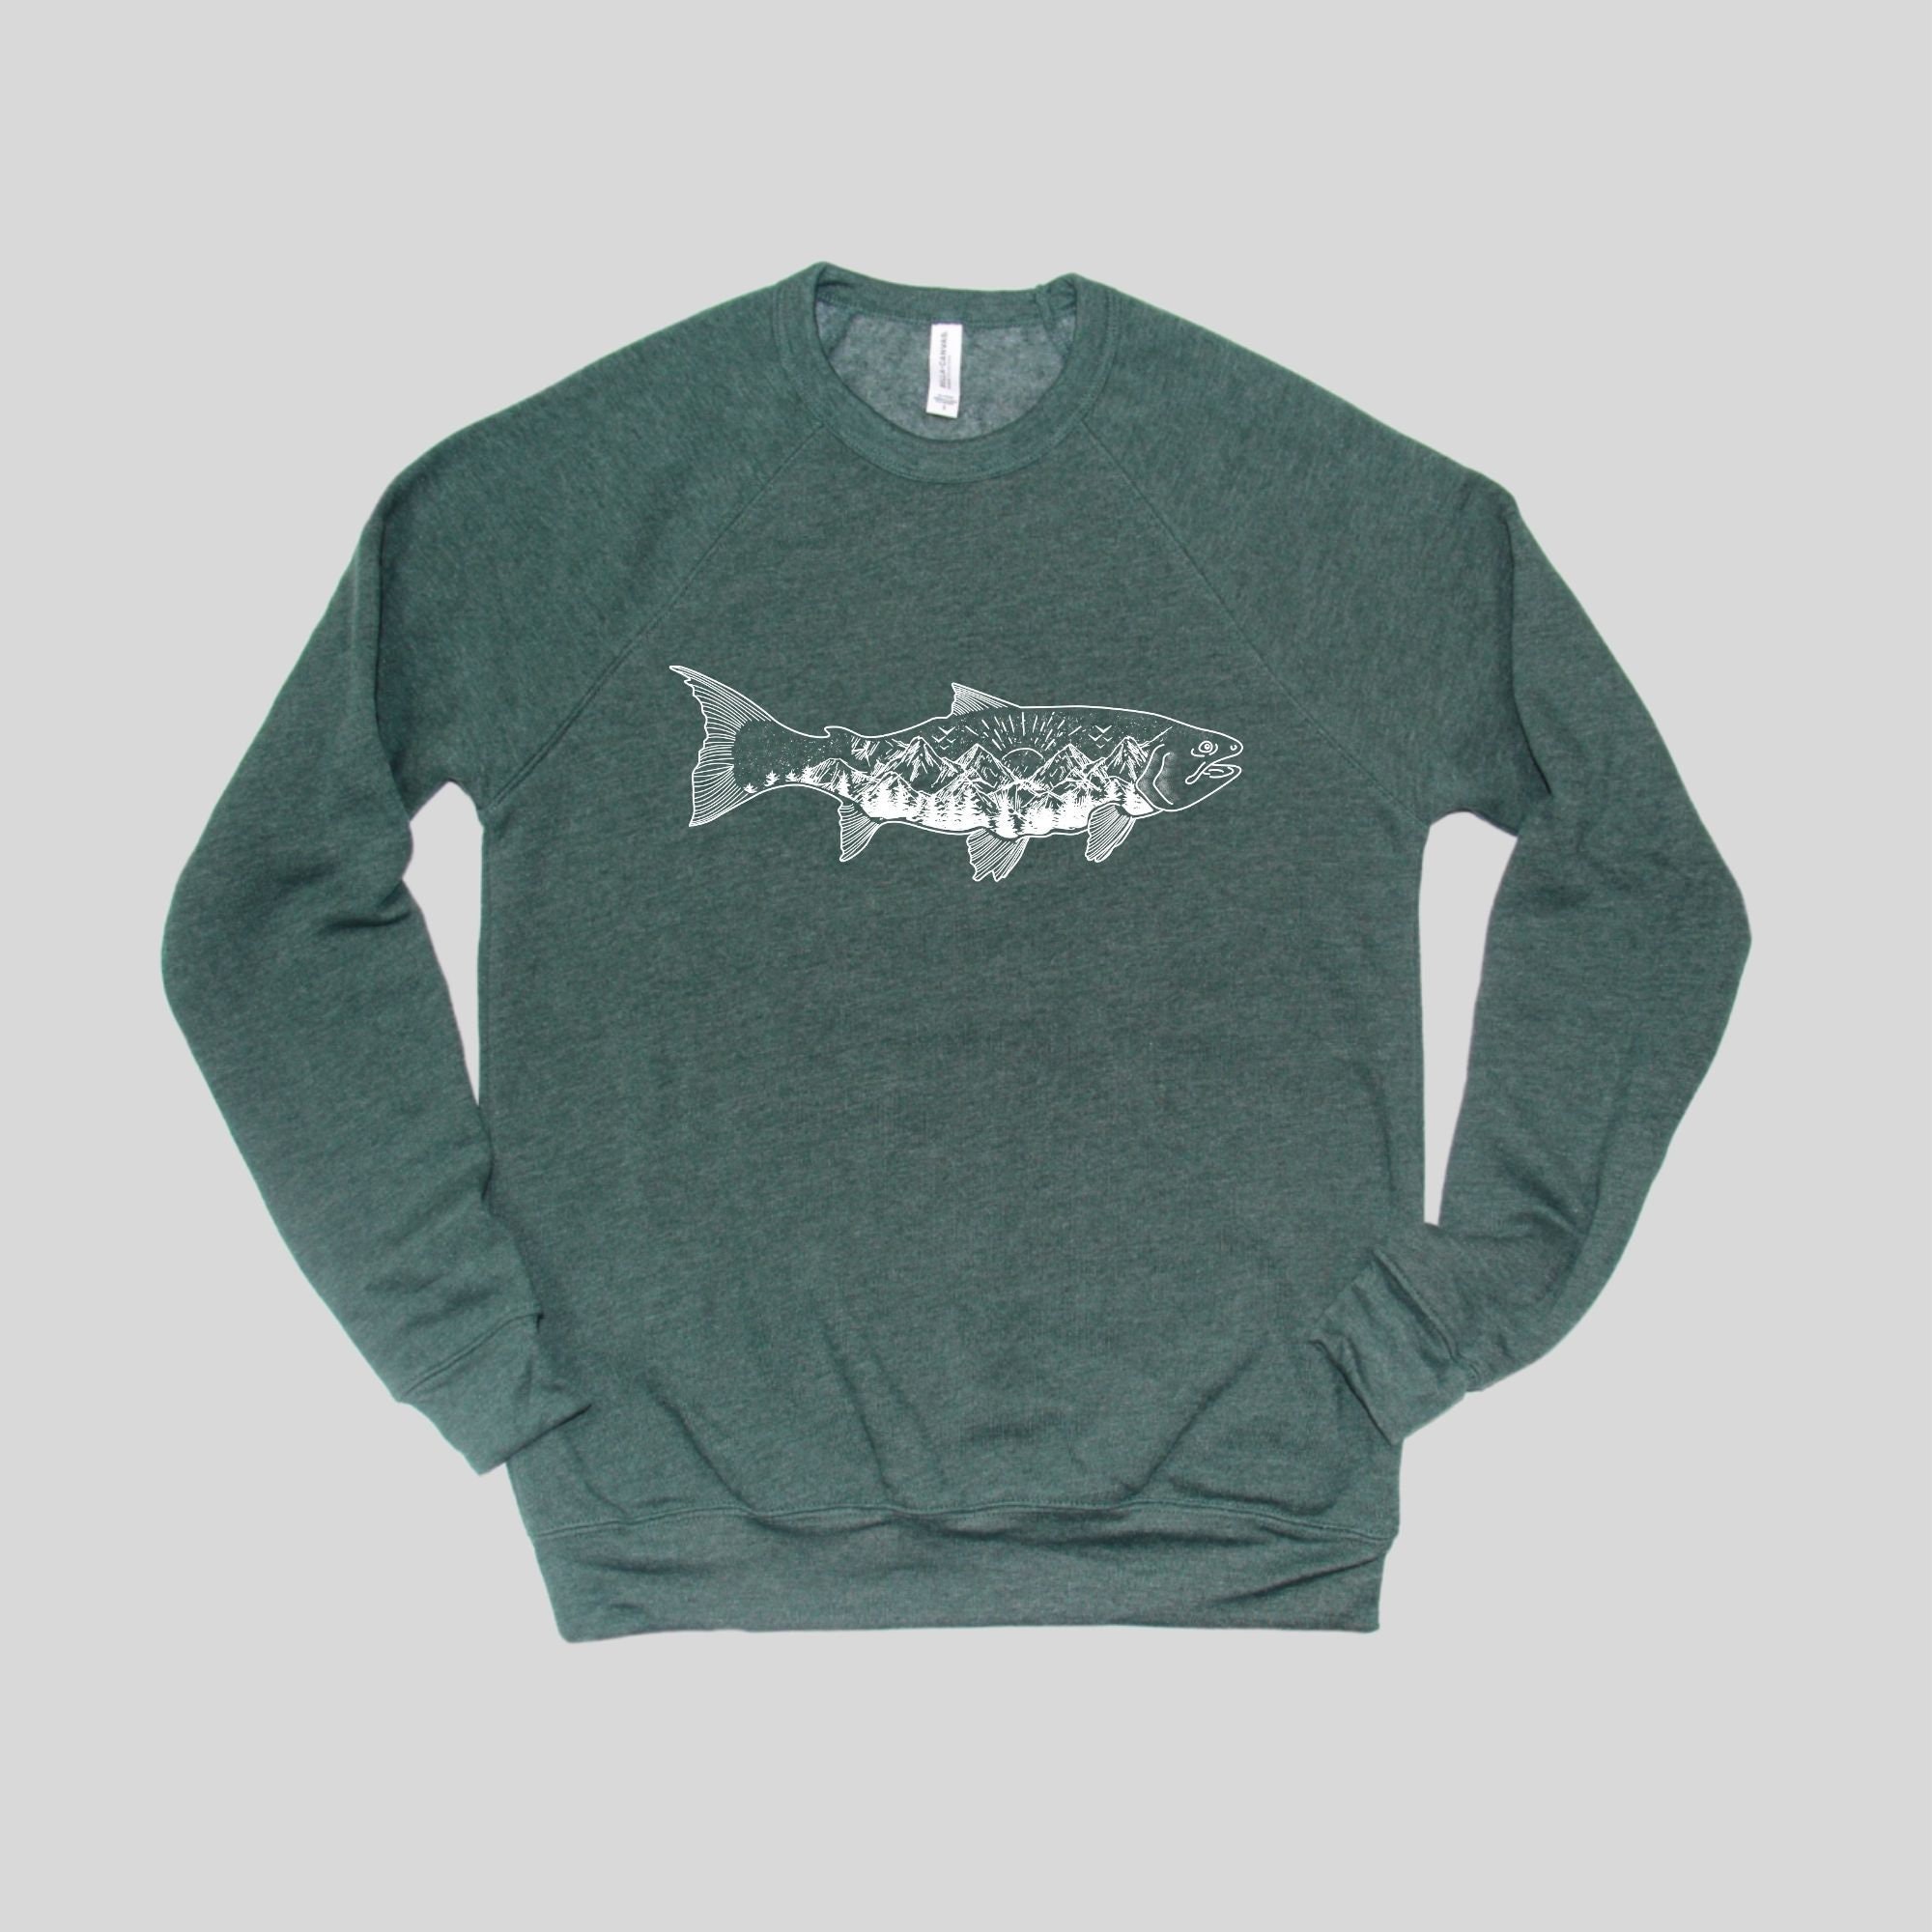 Vintage Orvis Trout Sweater - XL Would make a great Christmas Sweater. $125  - Sold ♻️ #flyfishing #trout #fish #browntrout #brook